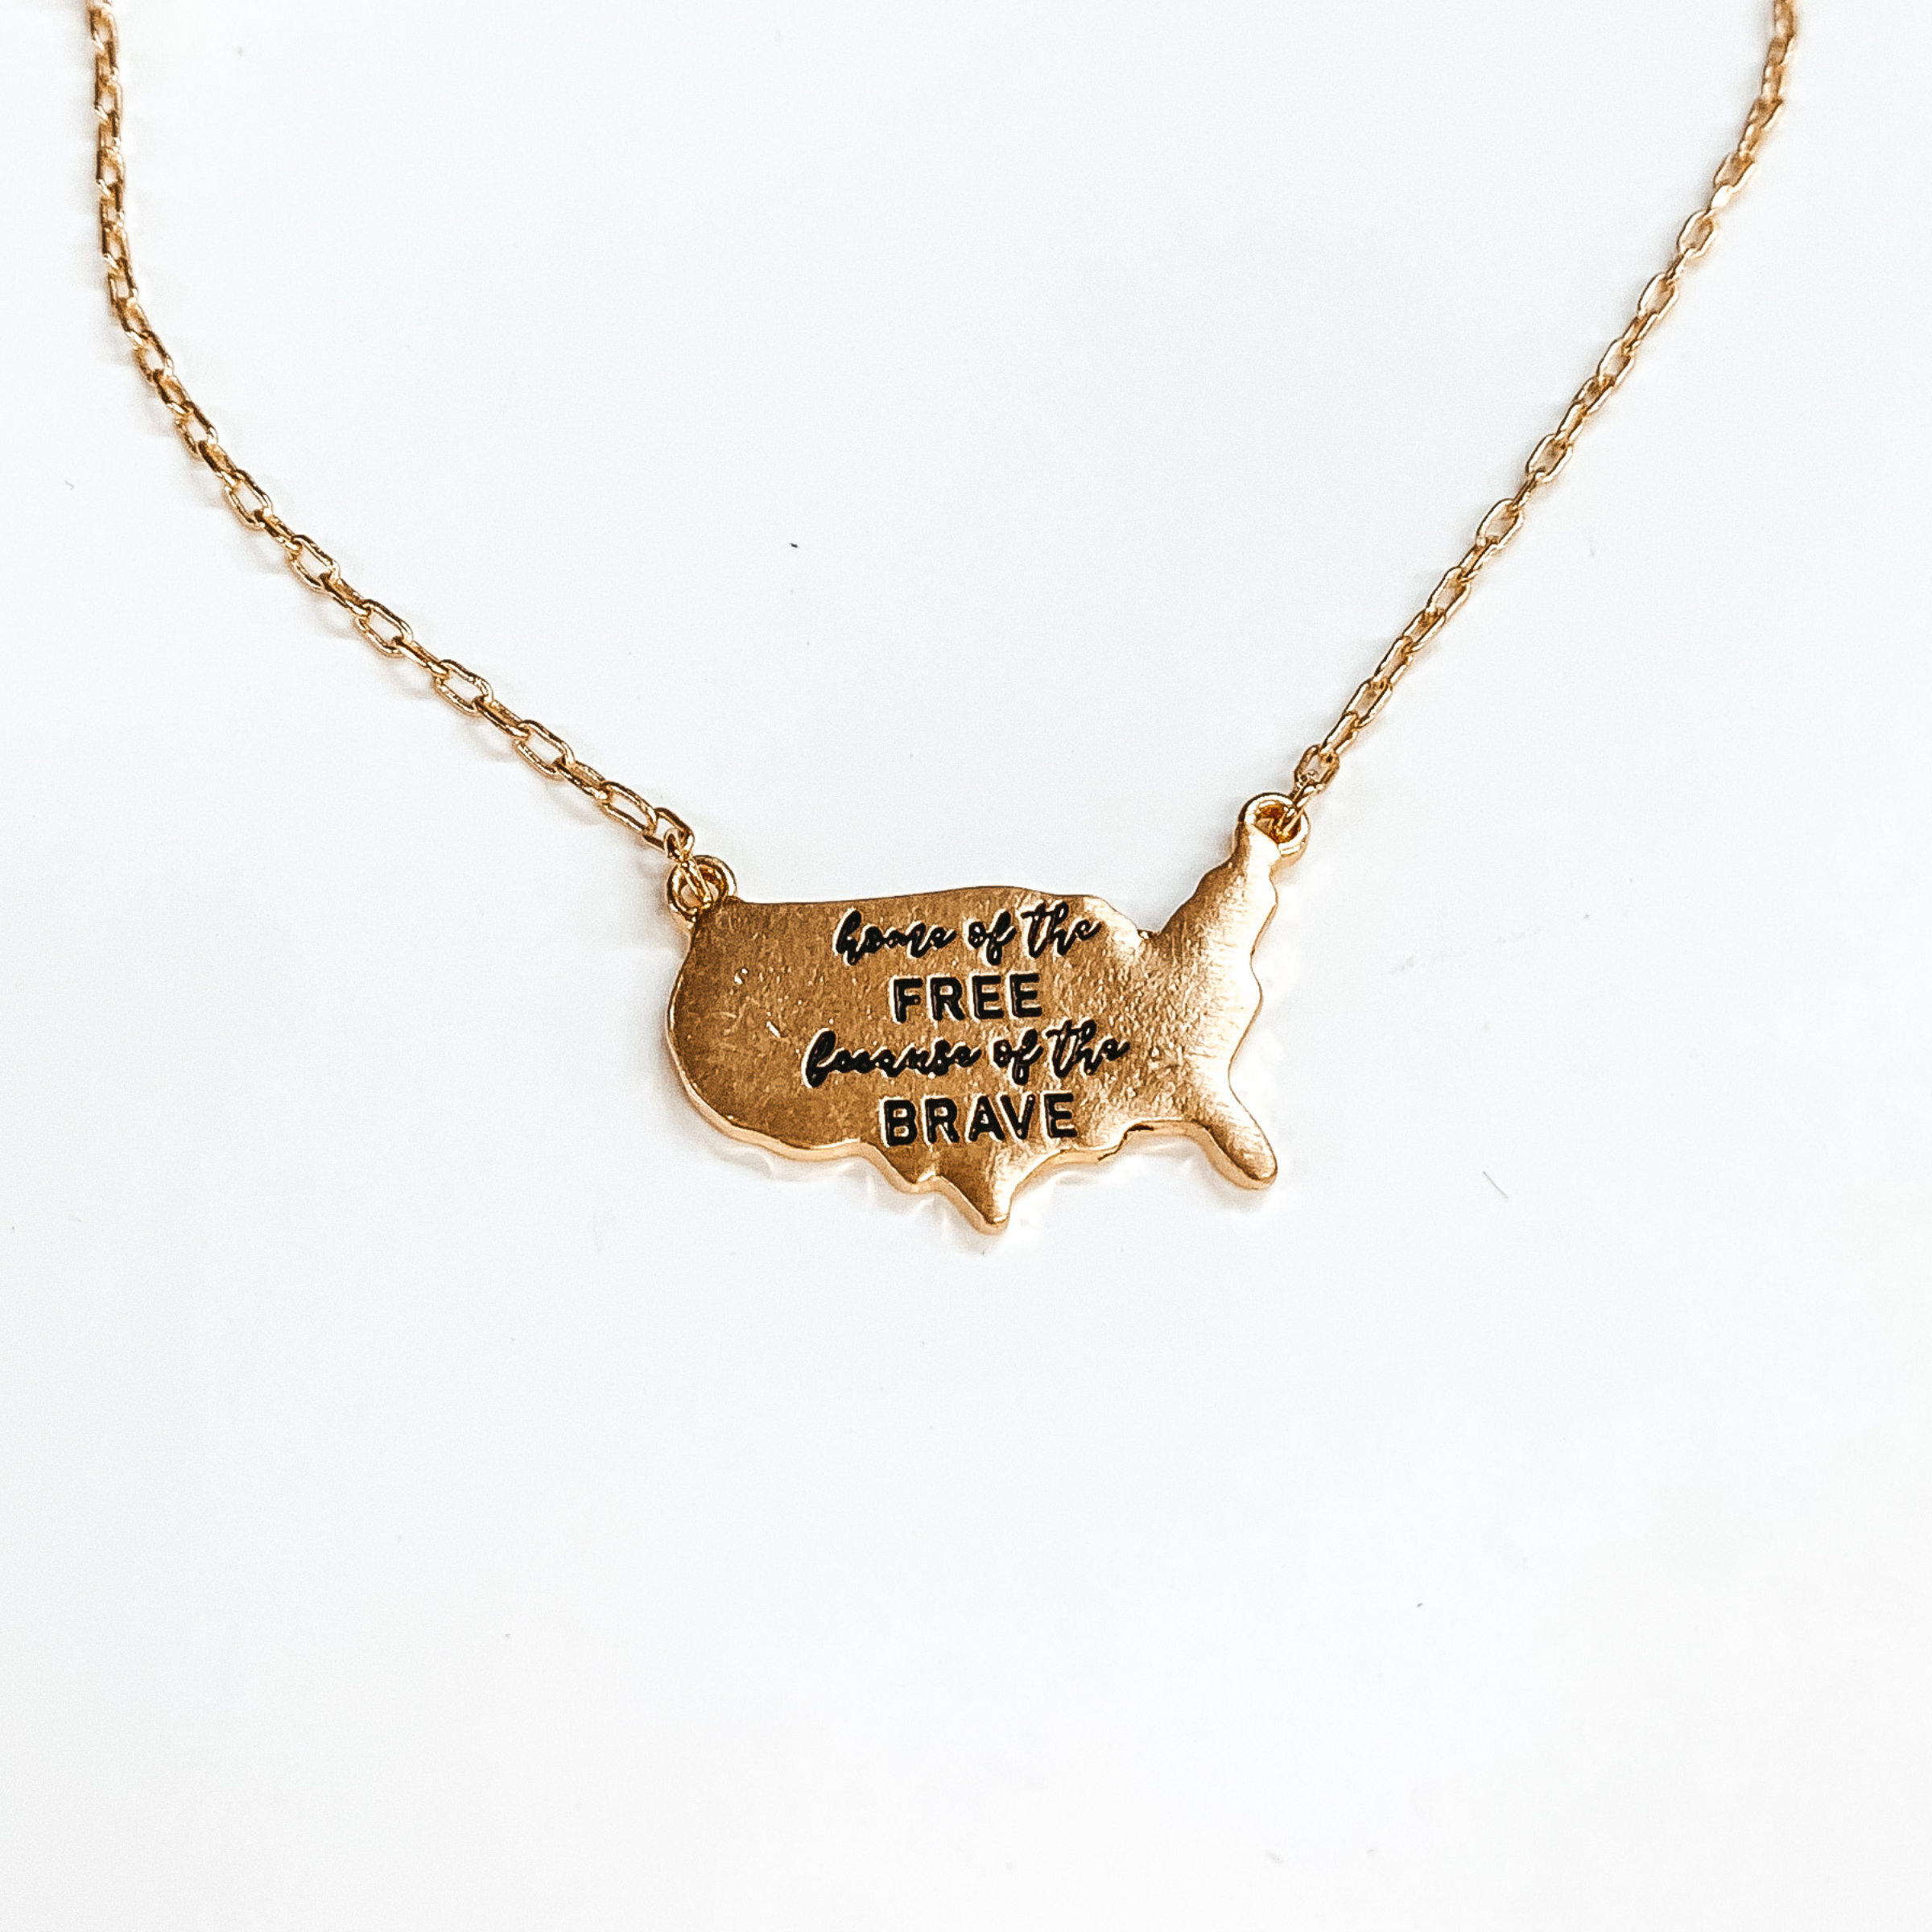 Home of the Free Because of the Brave Gold Necklace with USA Pendant - Giddy Up Glamour Boutique